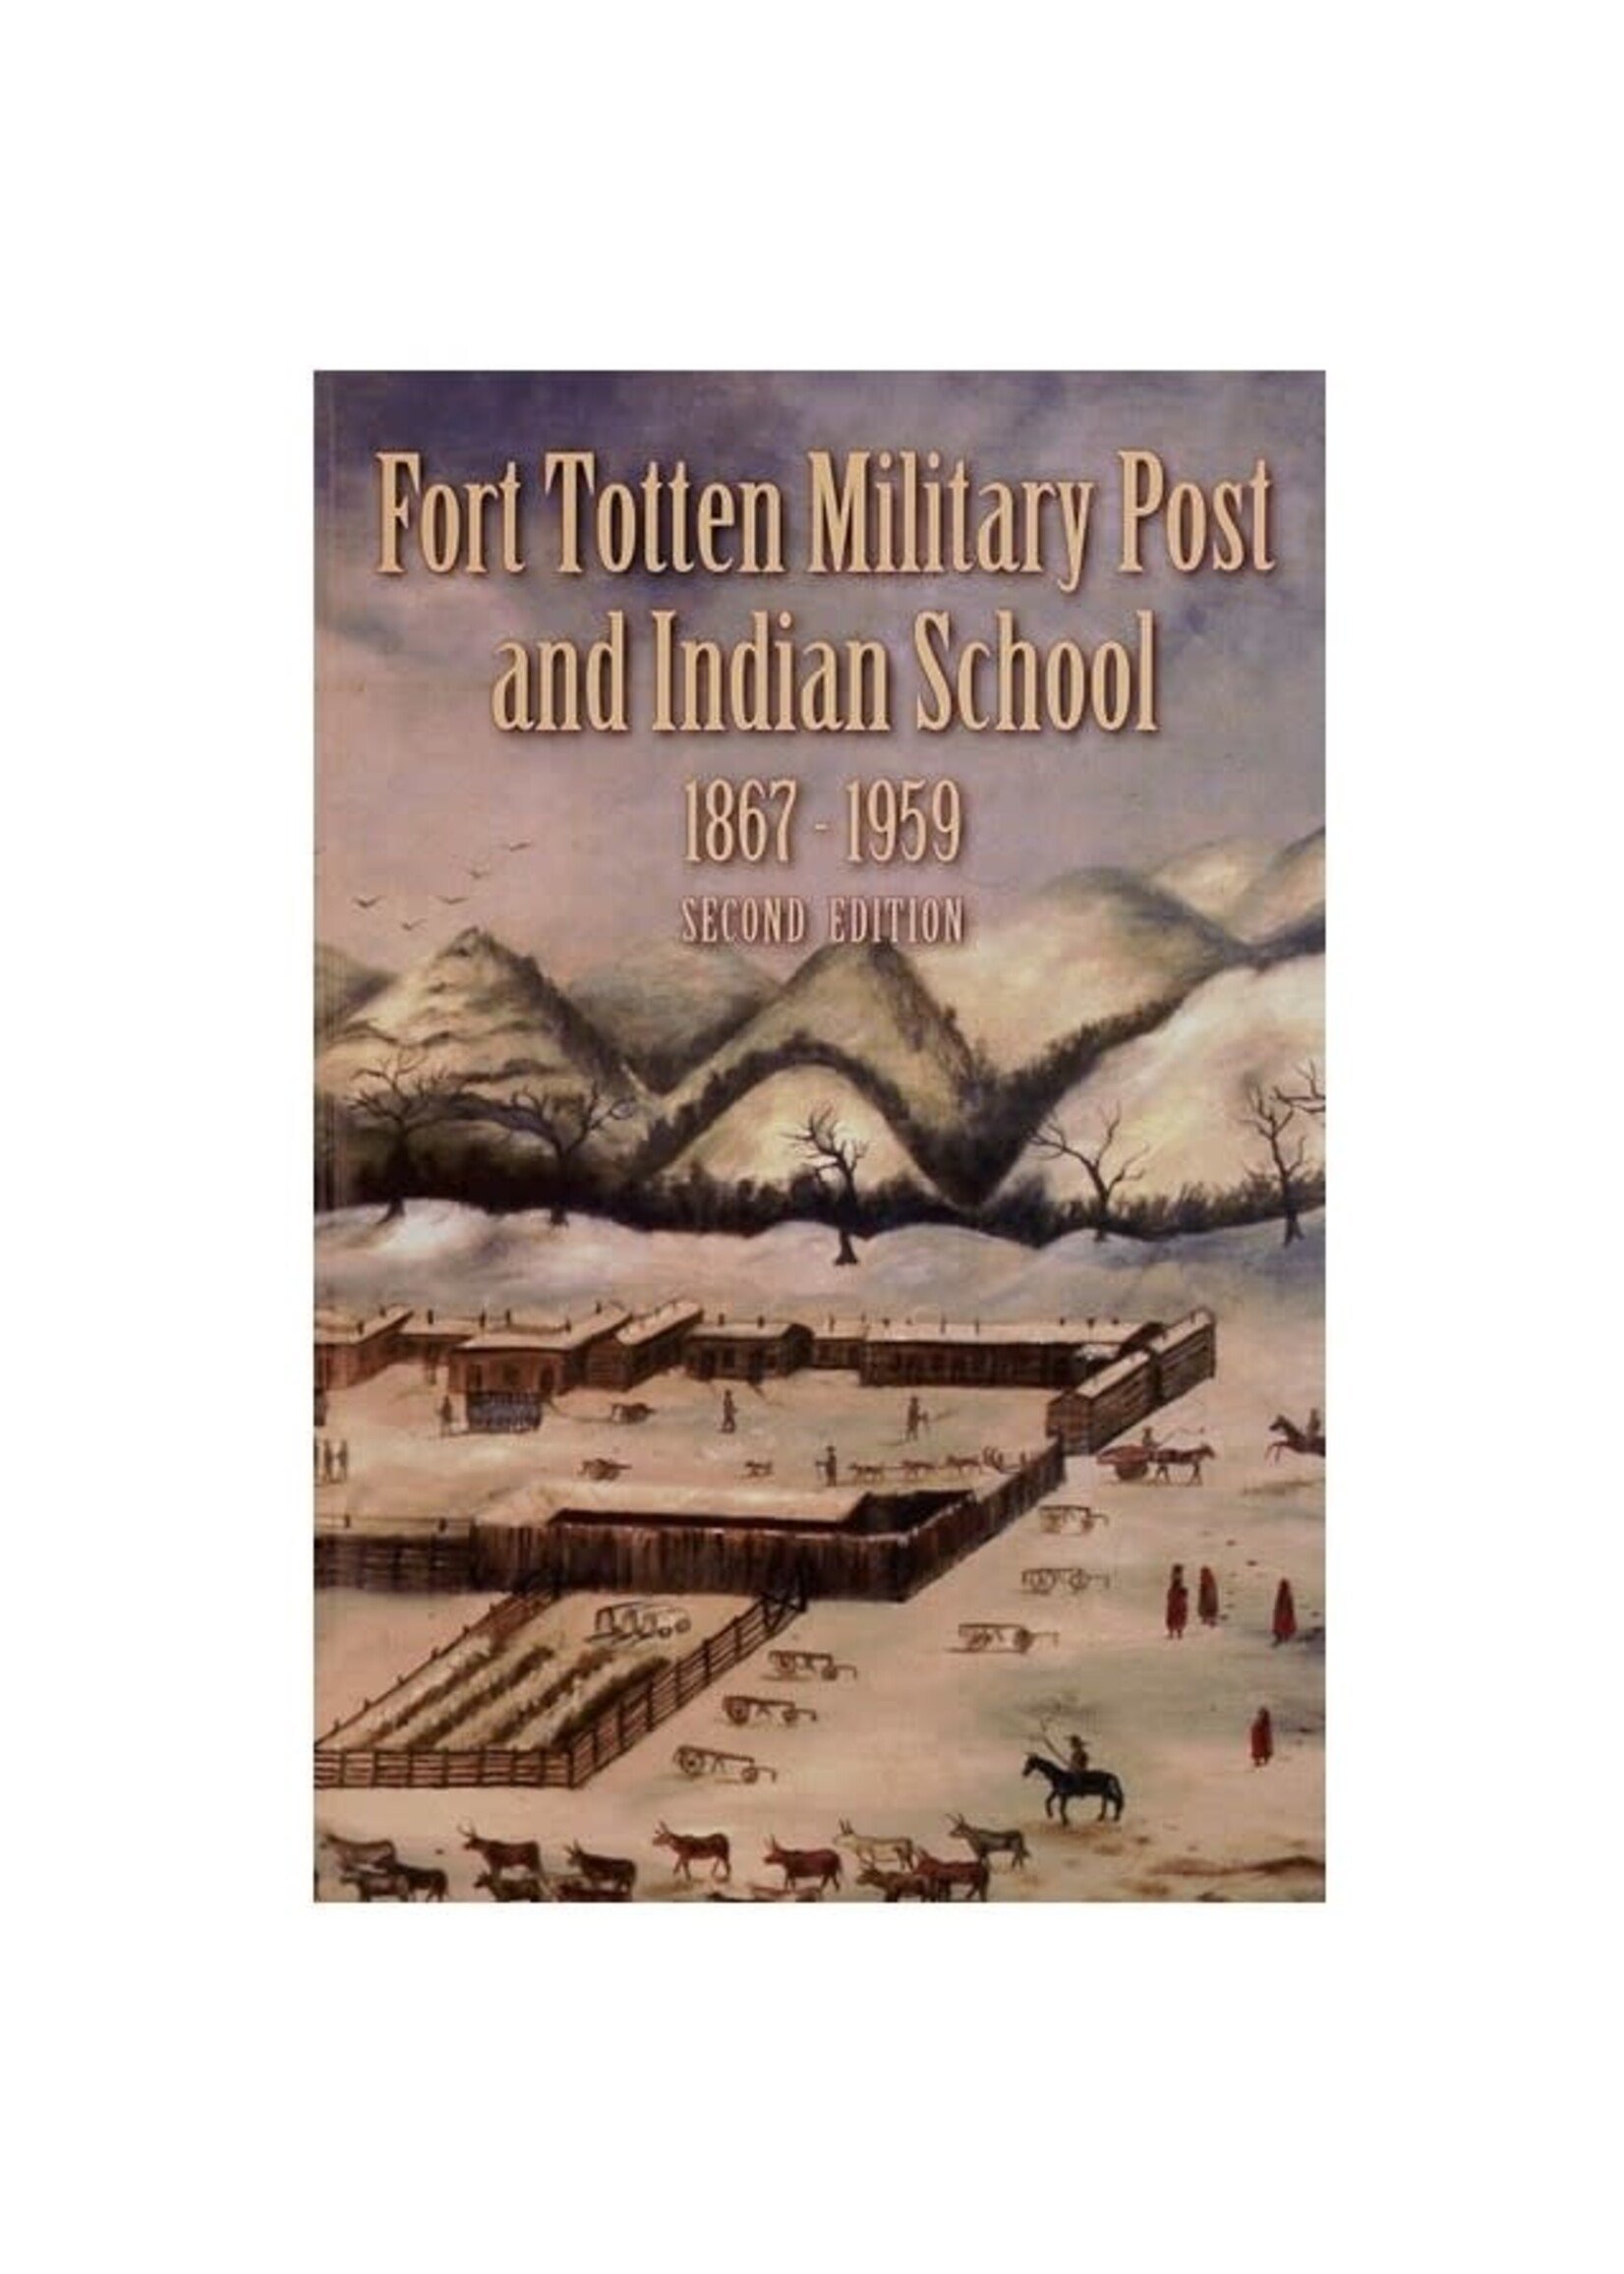 Fort Totten Military Post and Indian School 1867-1959: Second Edition